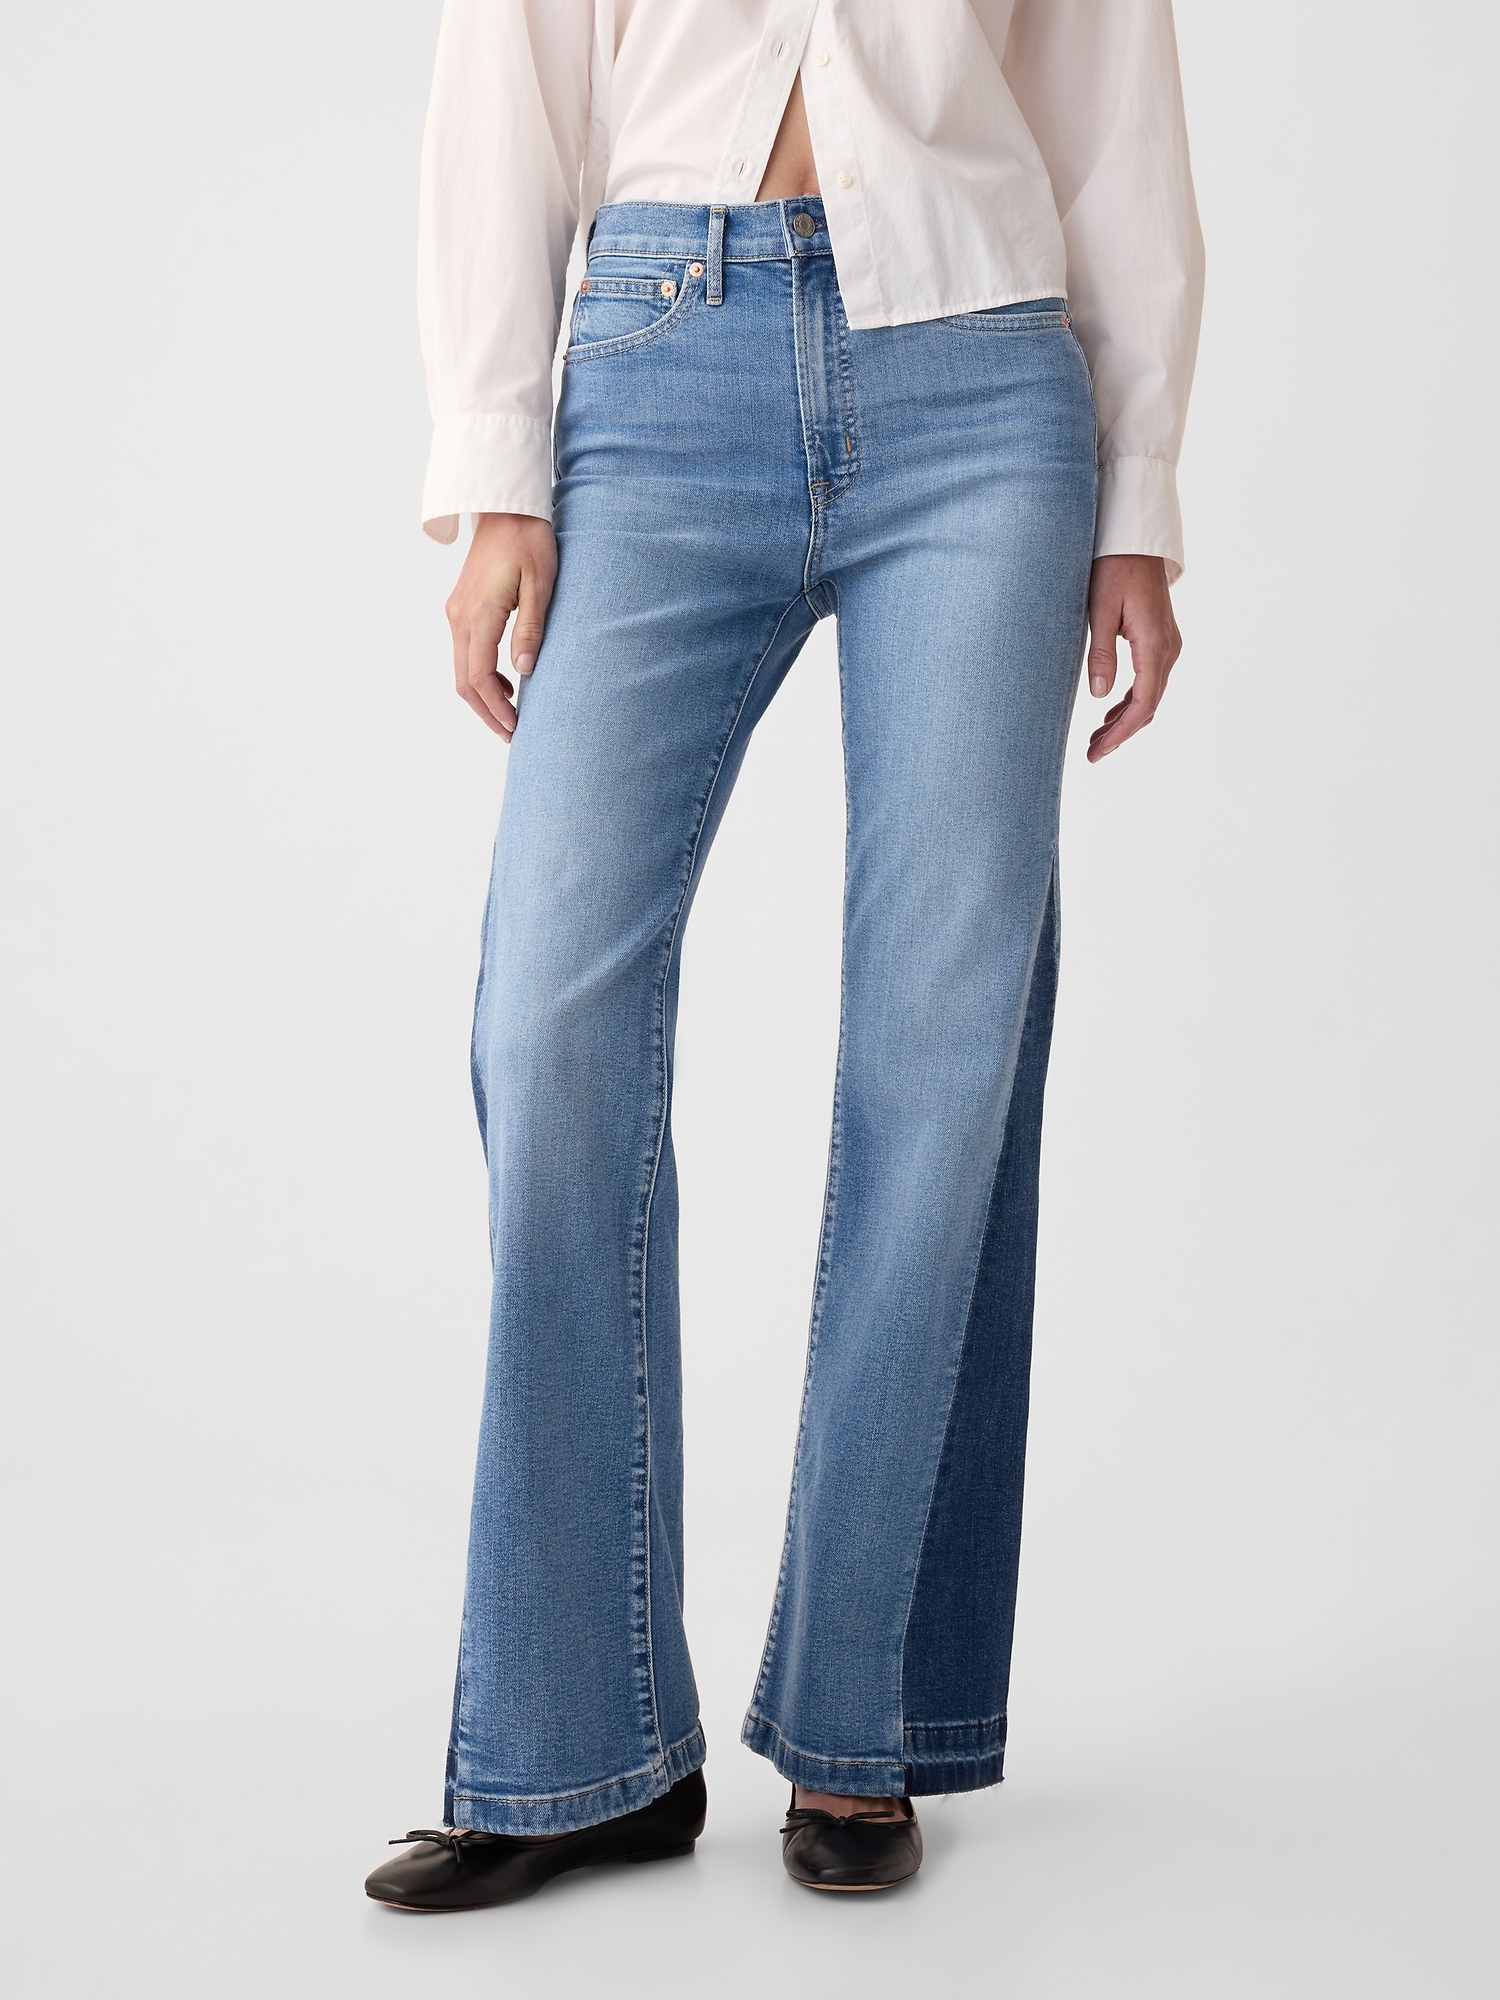 Buy Gap 70's Flare Jeans from the Gap online shop